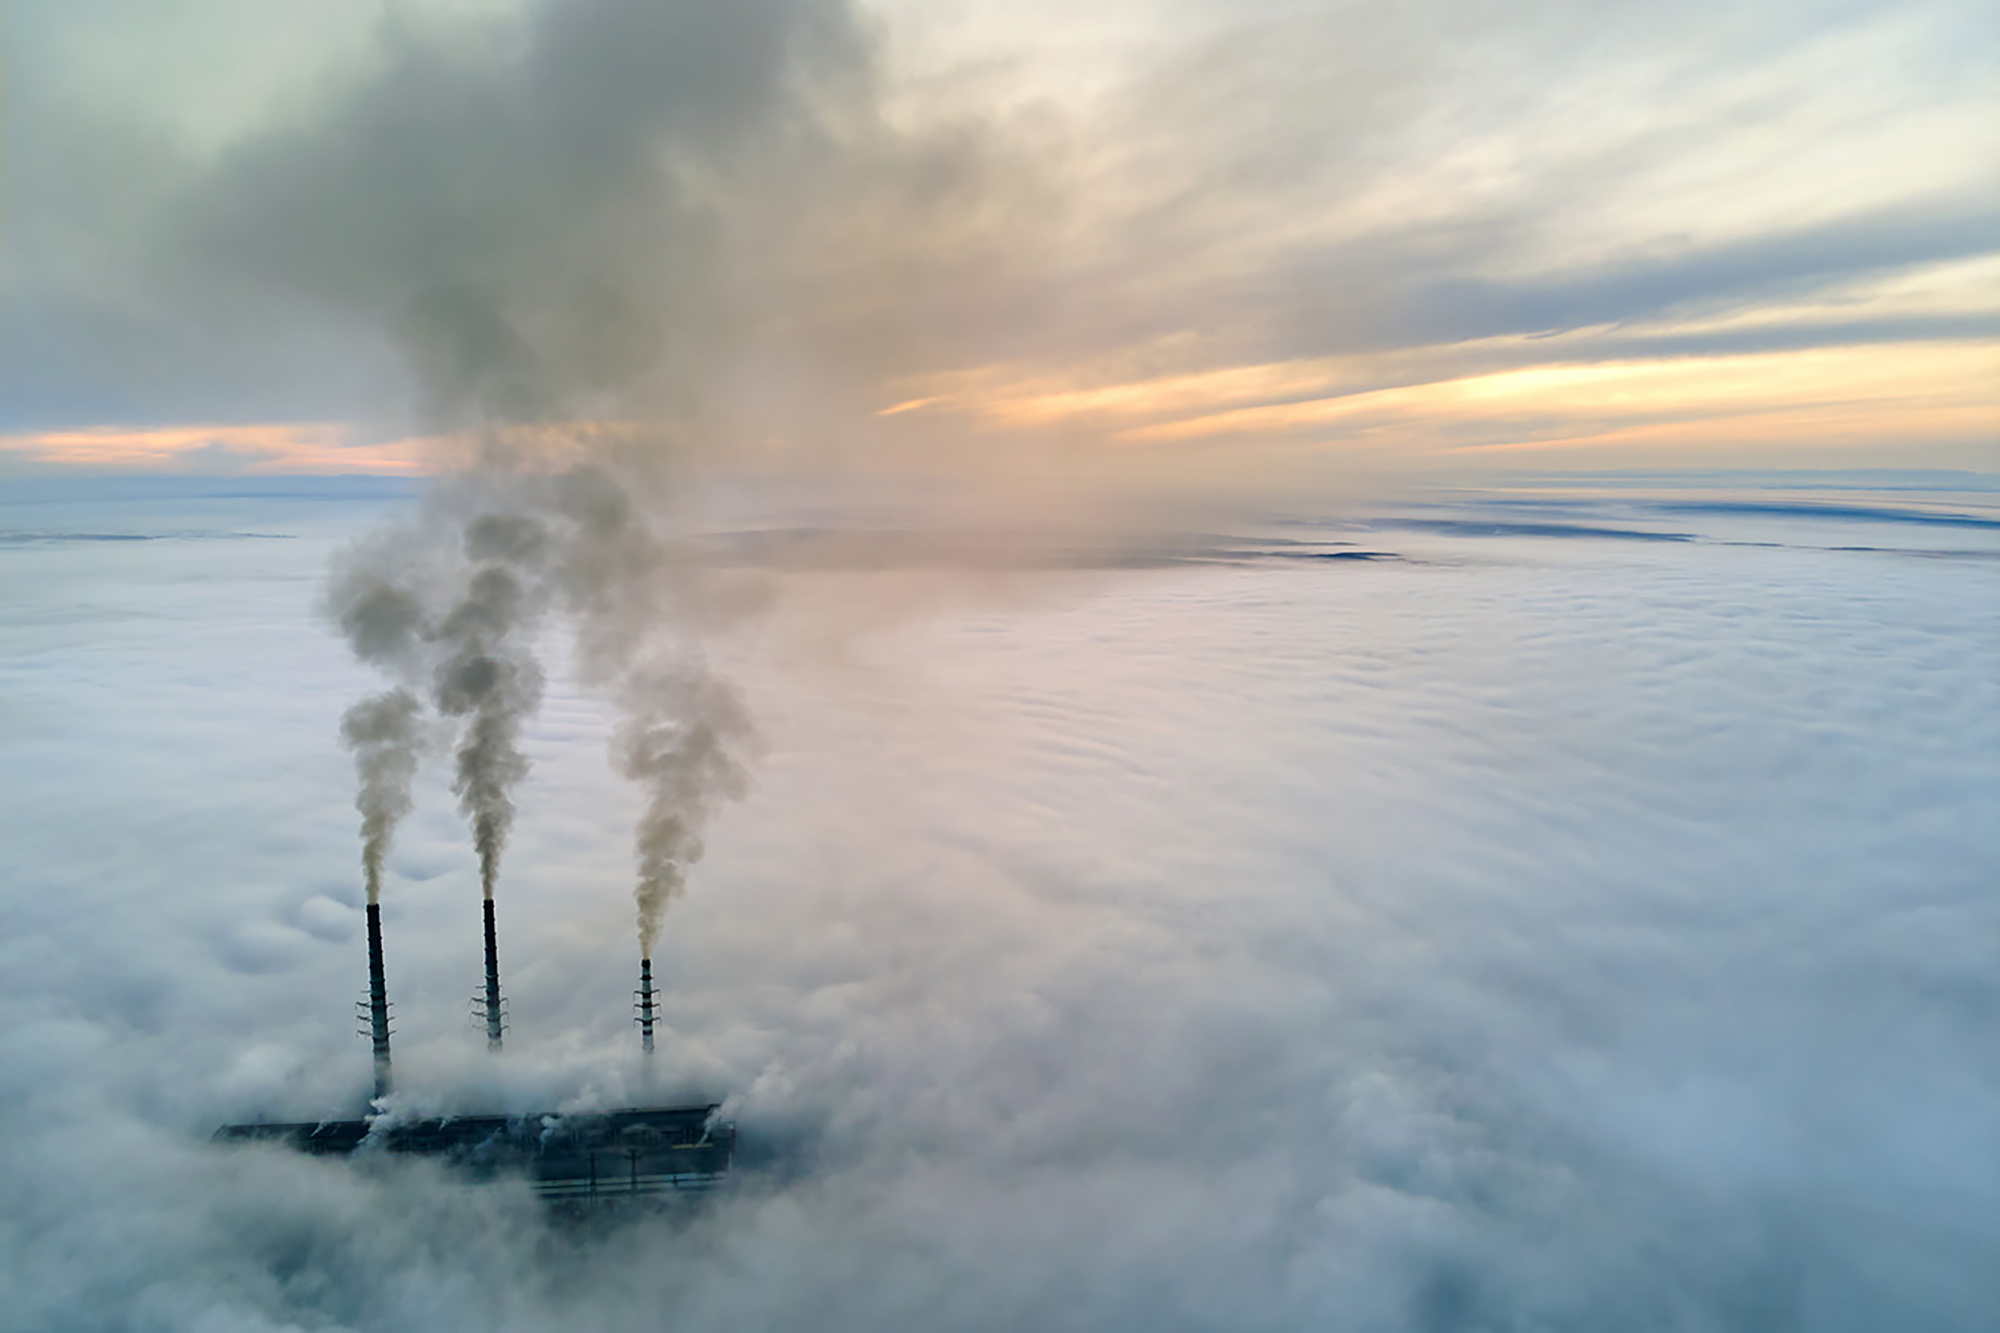 Aerial view of a coal-fired power plant and tall smokestacks rising and polluting the atmosphere as the sun goes down.